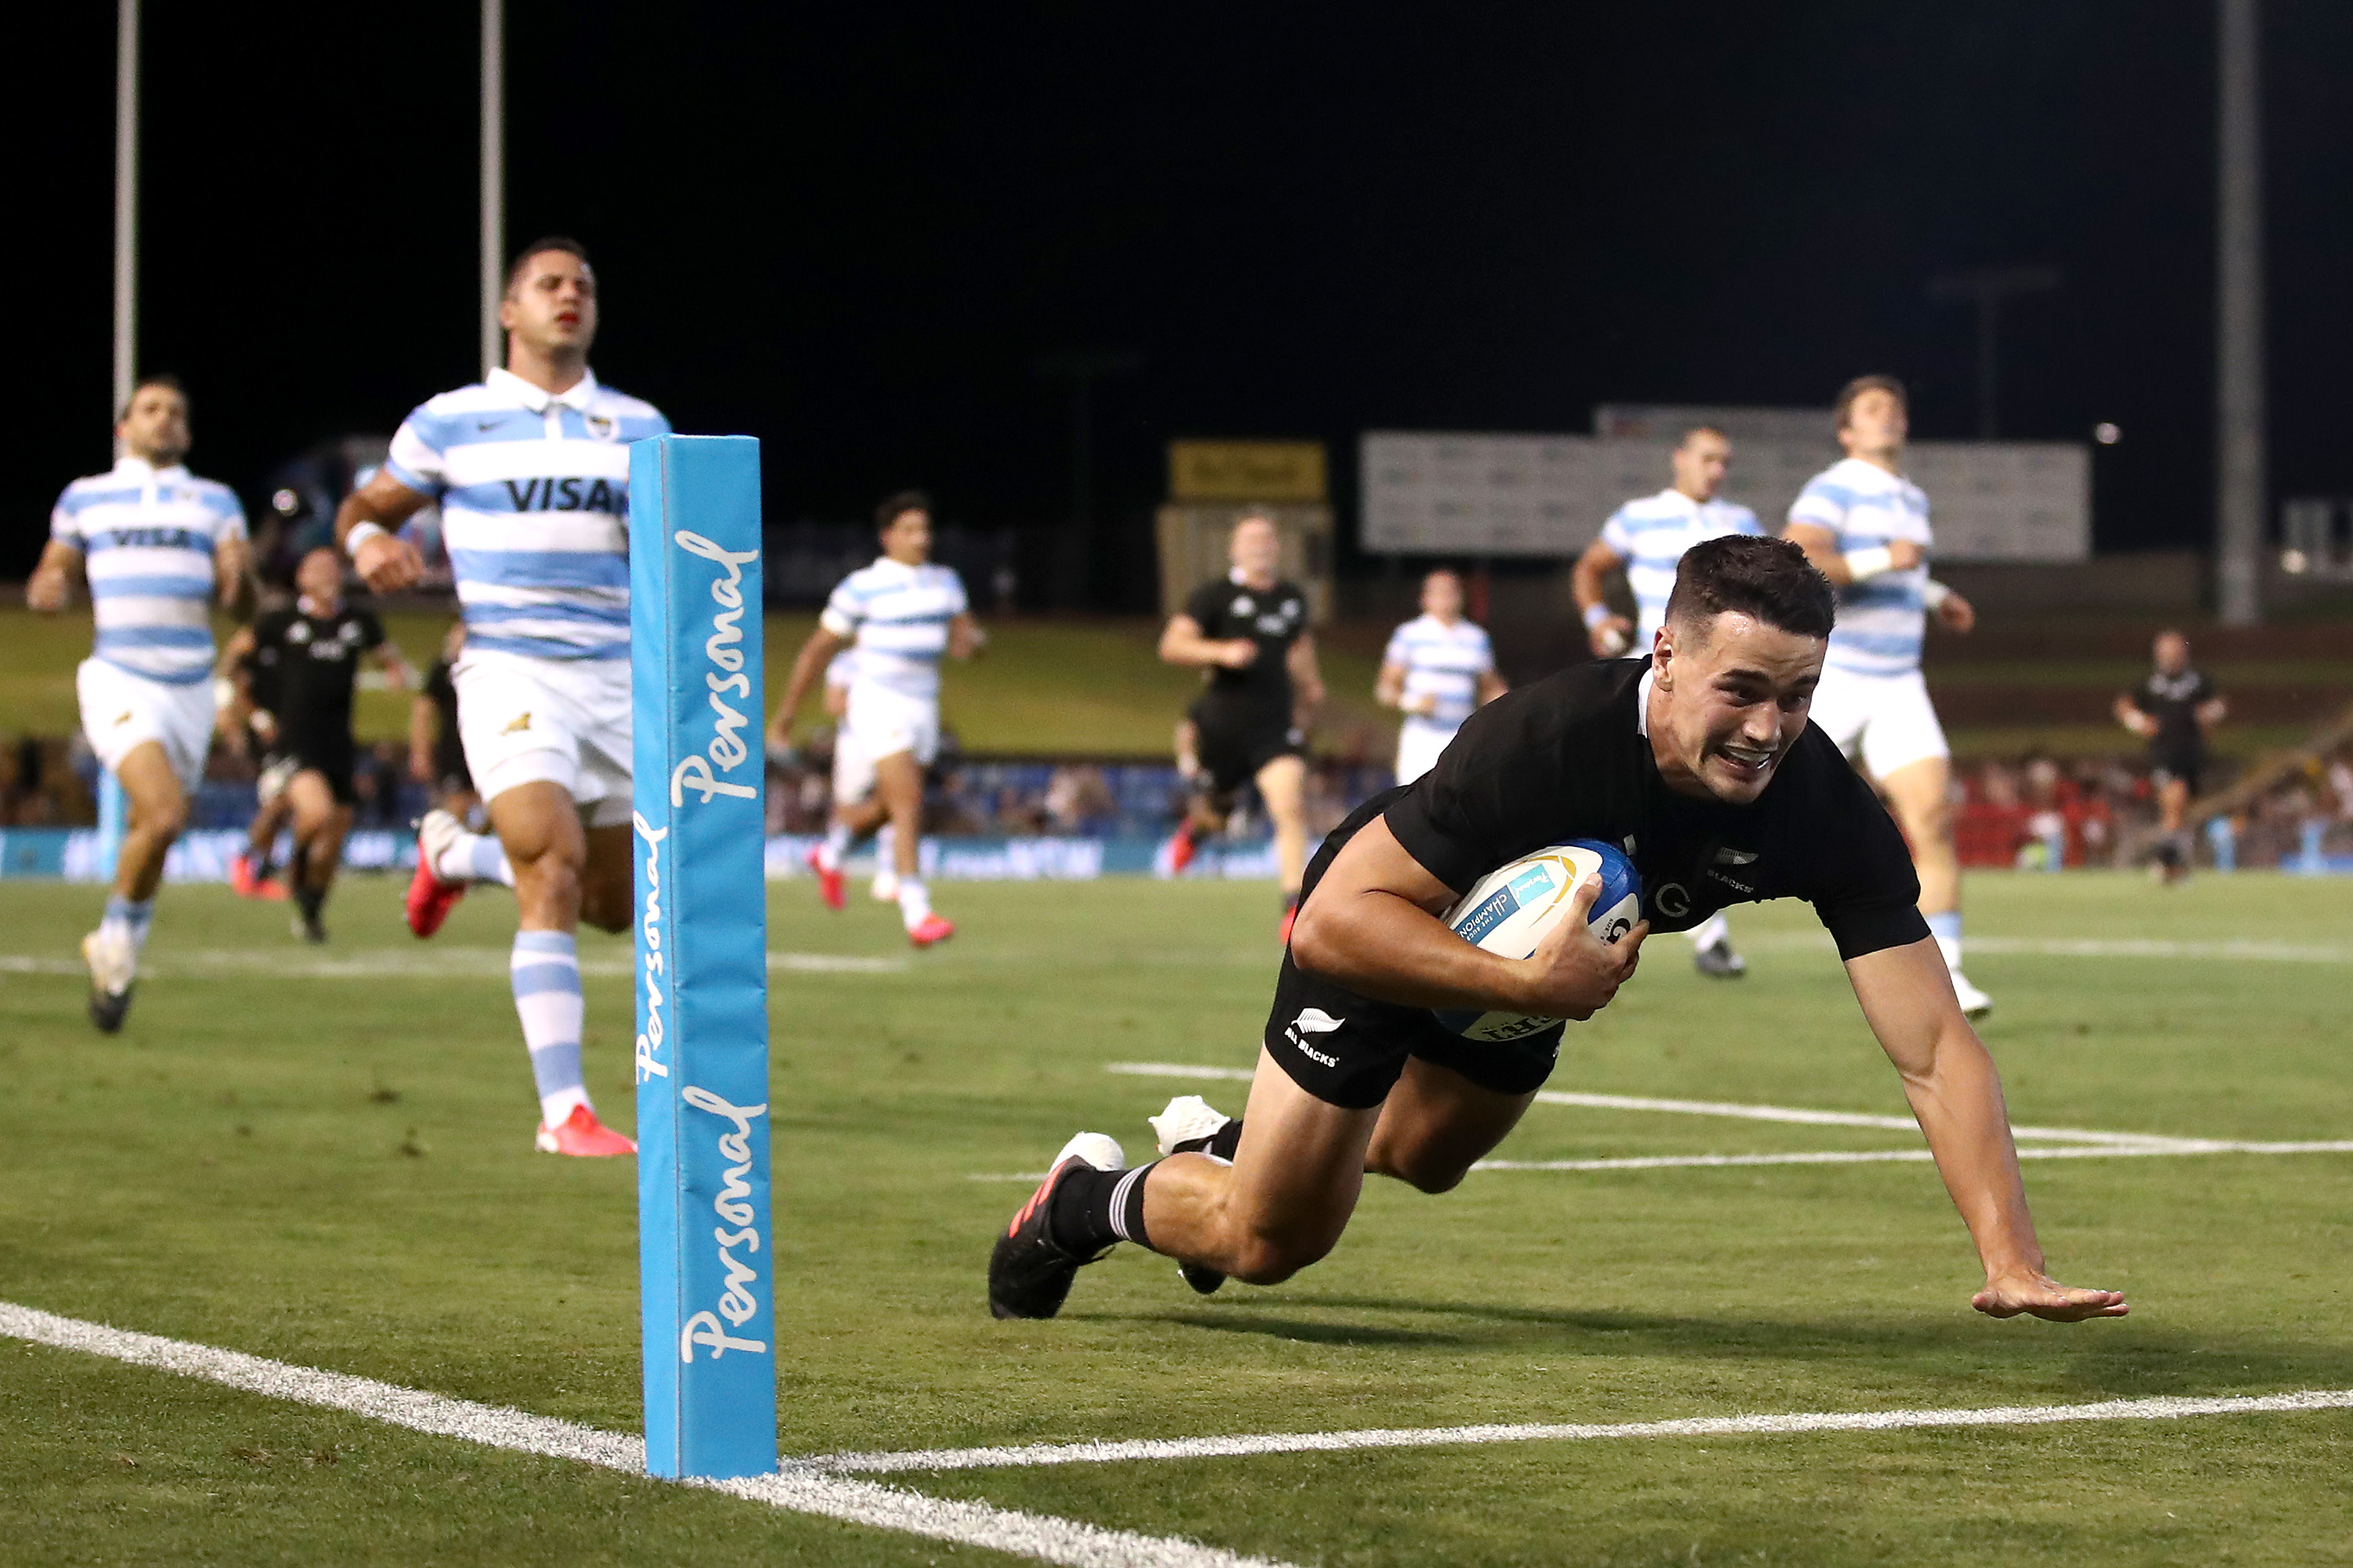 Will Jordan of the All Blacks makes a break to score a try.